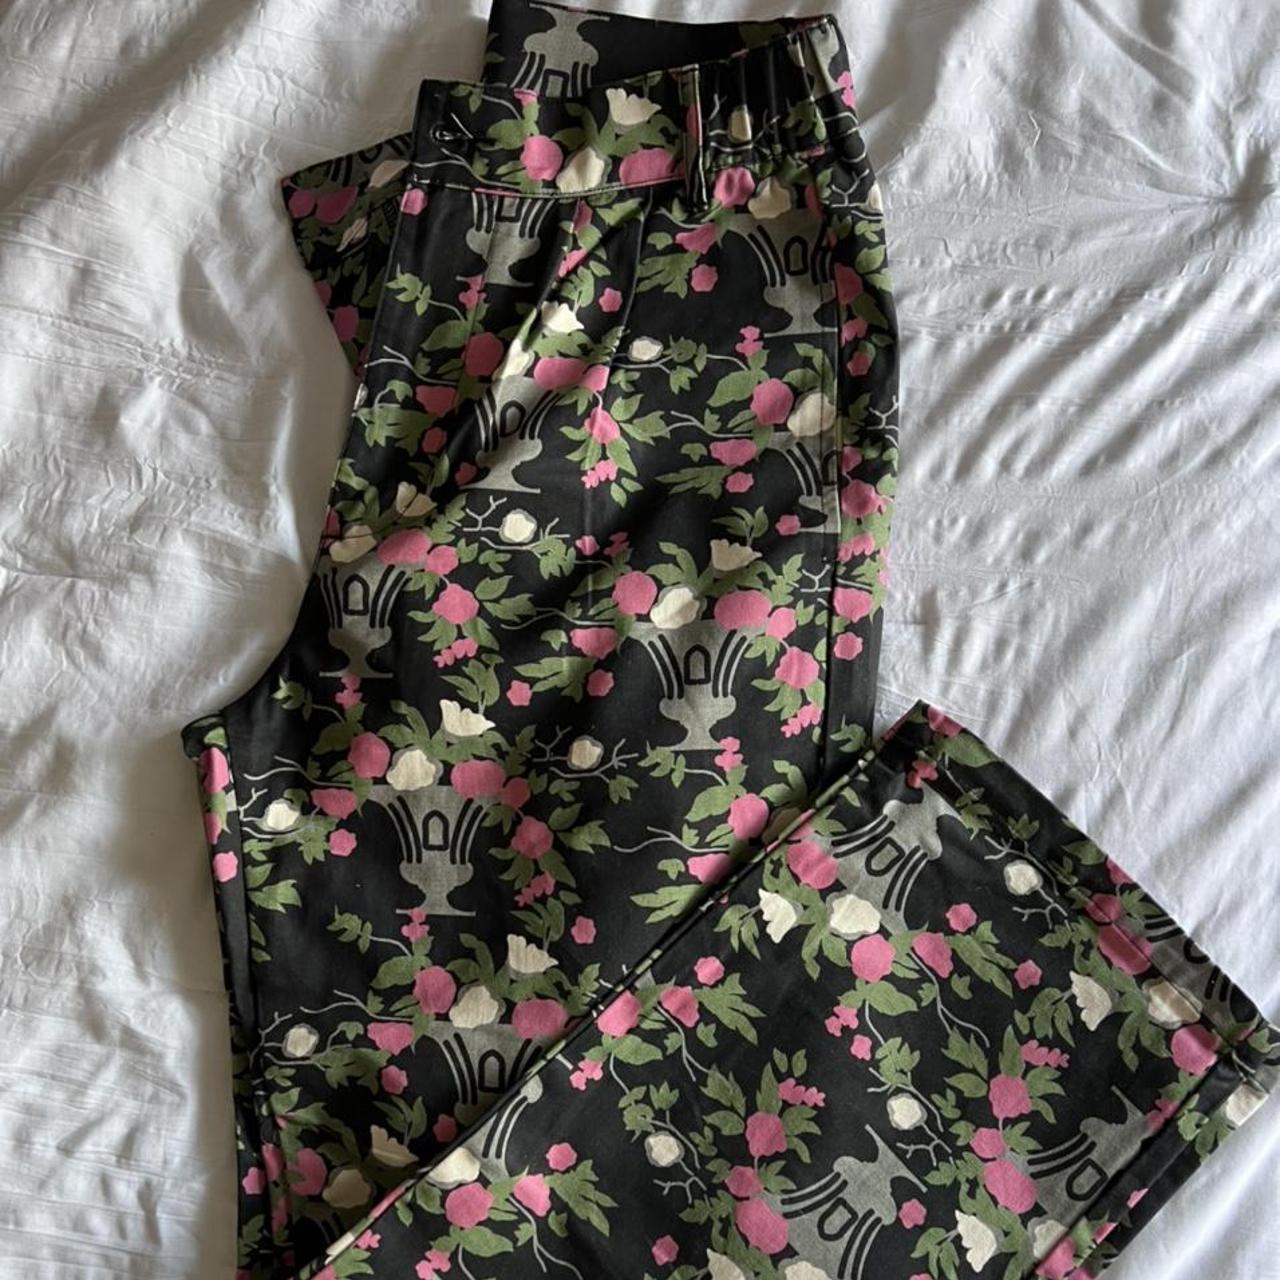 Product Image 1 - Lazy oaf floral trousers size